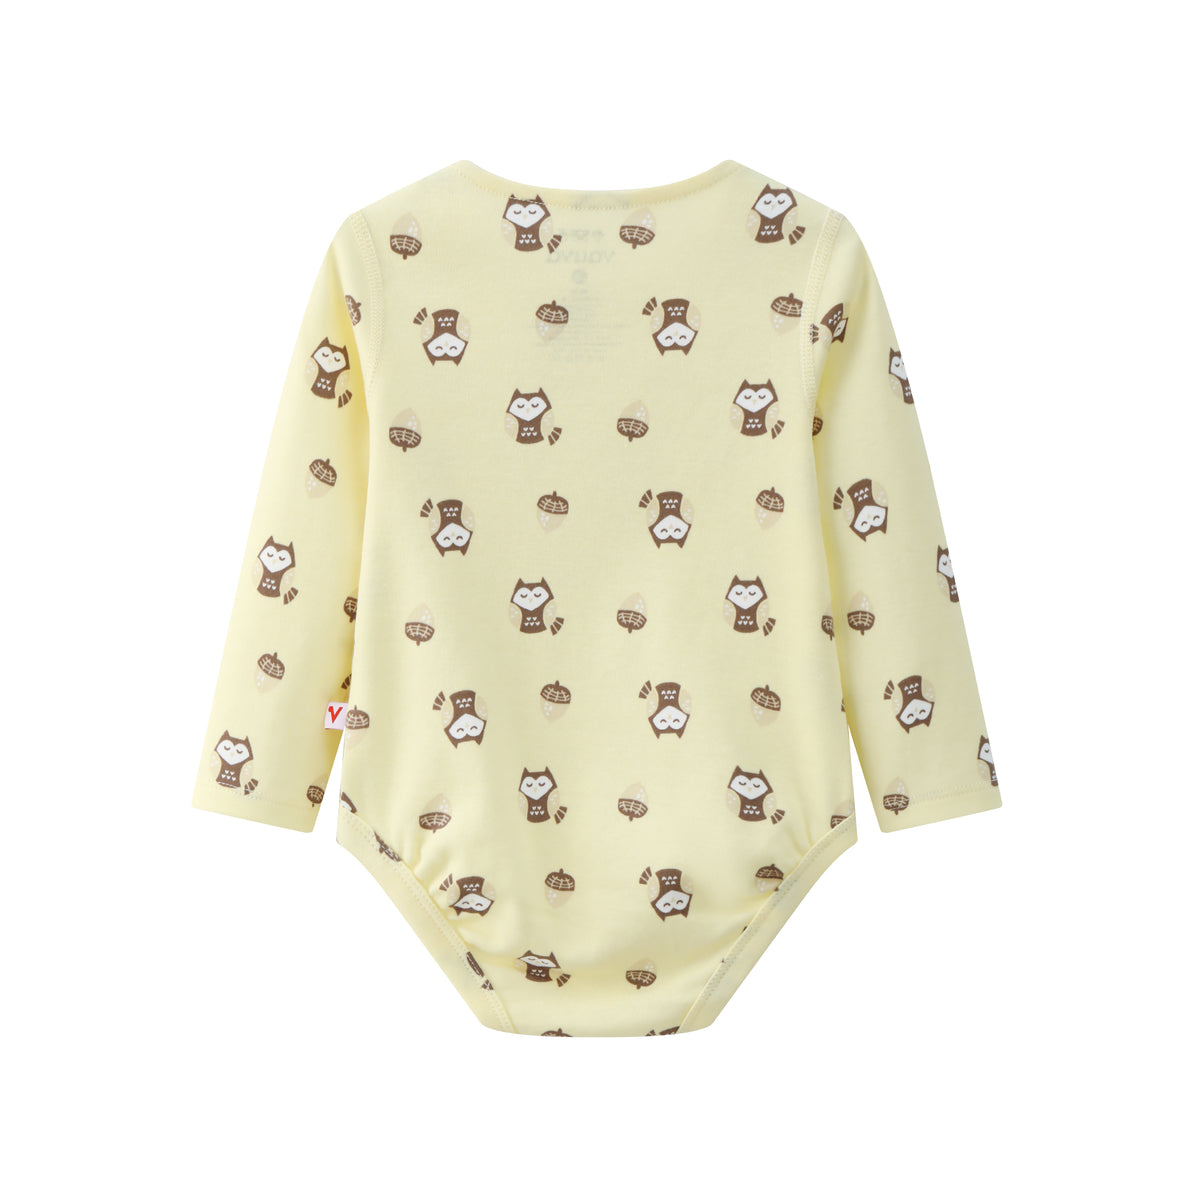 Vauva BBNS - Baby Anti-bacterial Organic Cotton Bodysuits (2-pack) product image back -02